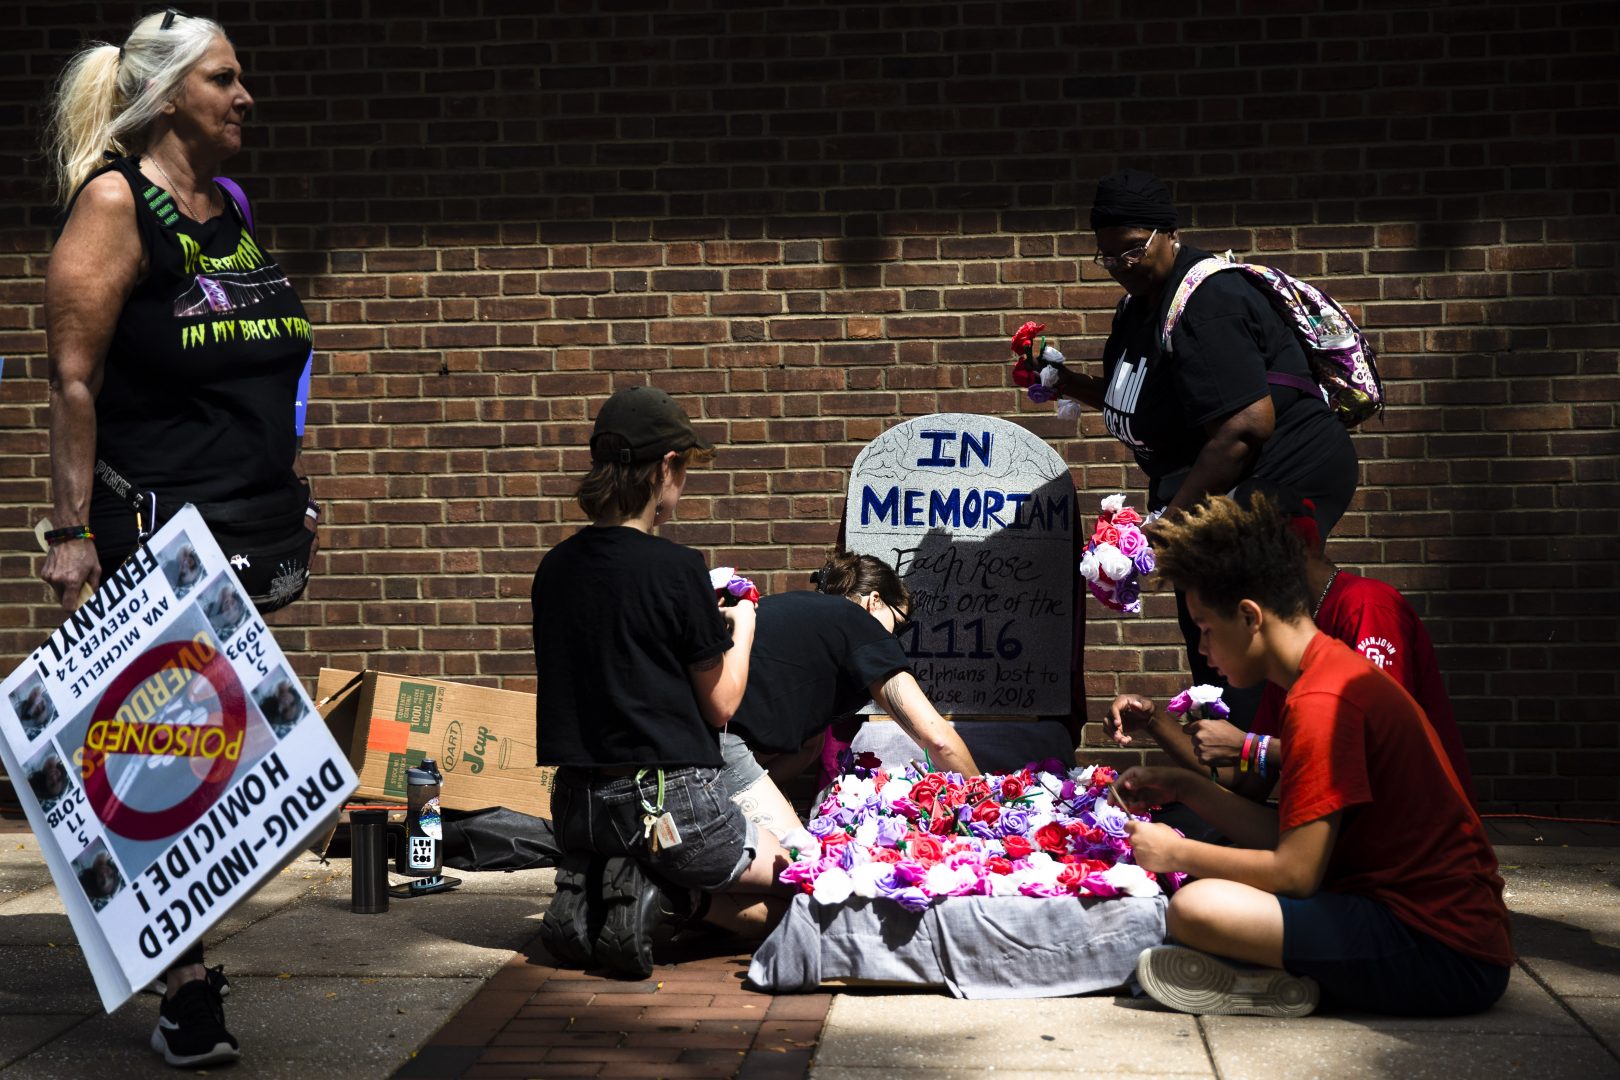 Protesters assemble a makeshift memorial to those lost to drug overdoses last year during a demonstration in support of a proposed supervised injection site, outside the federal courthouse in Philadelphia, Thursday, Sept. 5, 2019.   U.S. Attorney William McSwain believes the plan to open a supervised injection site violates the federal Controlled Substances Act and wants a federal judge to declare it illegal before it opens.  